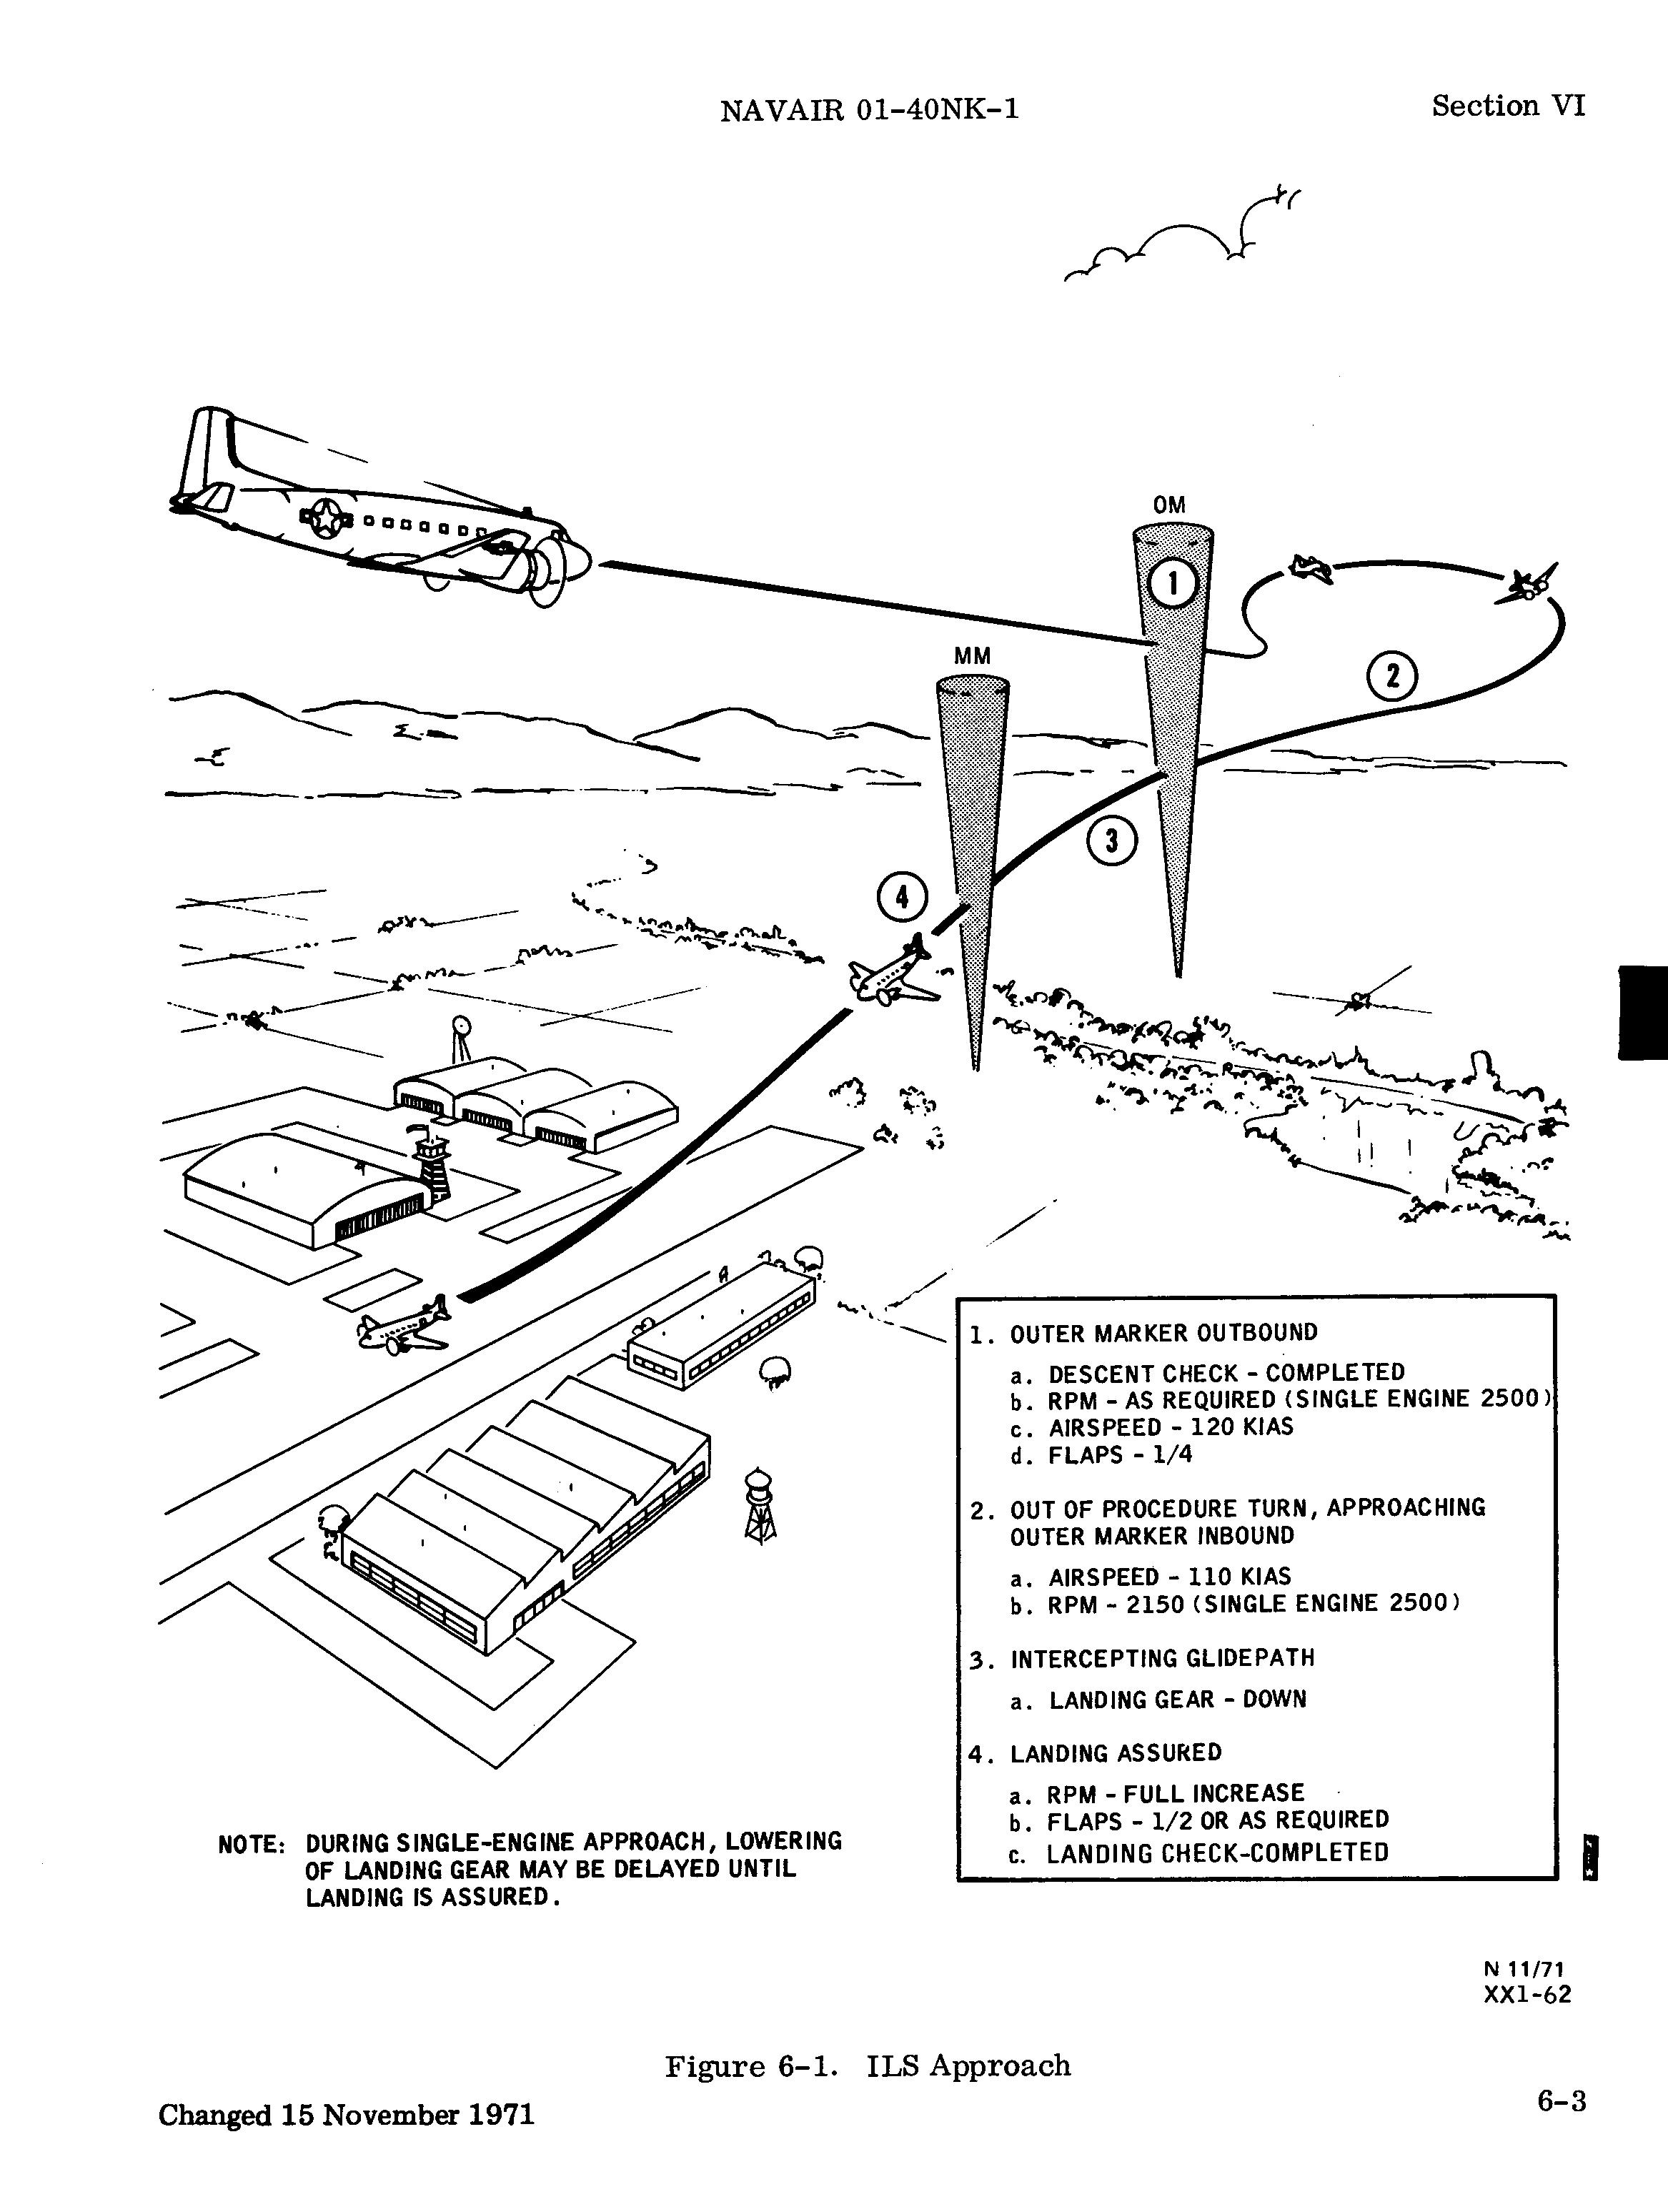 Sample page 153 from AirCorps Library document: NATOPS Flight Manual for Navy Model C-117D Aircraft